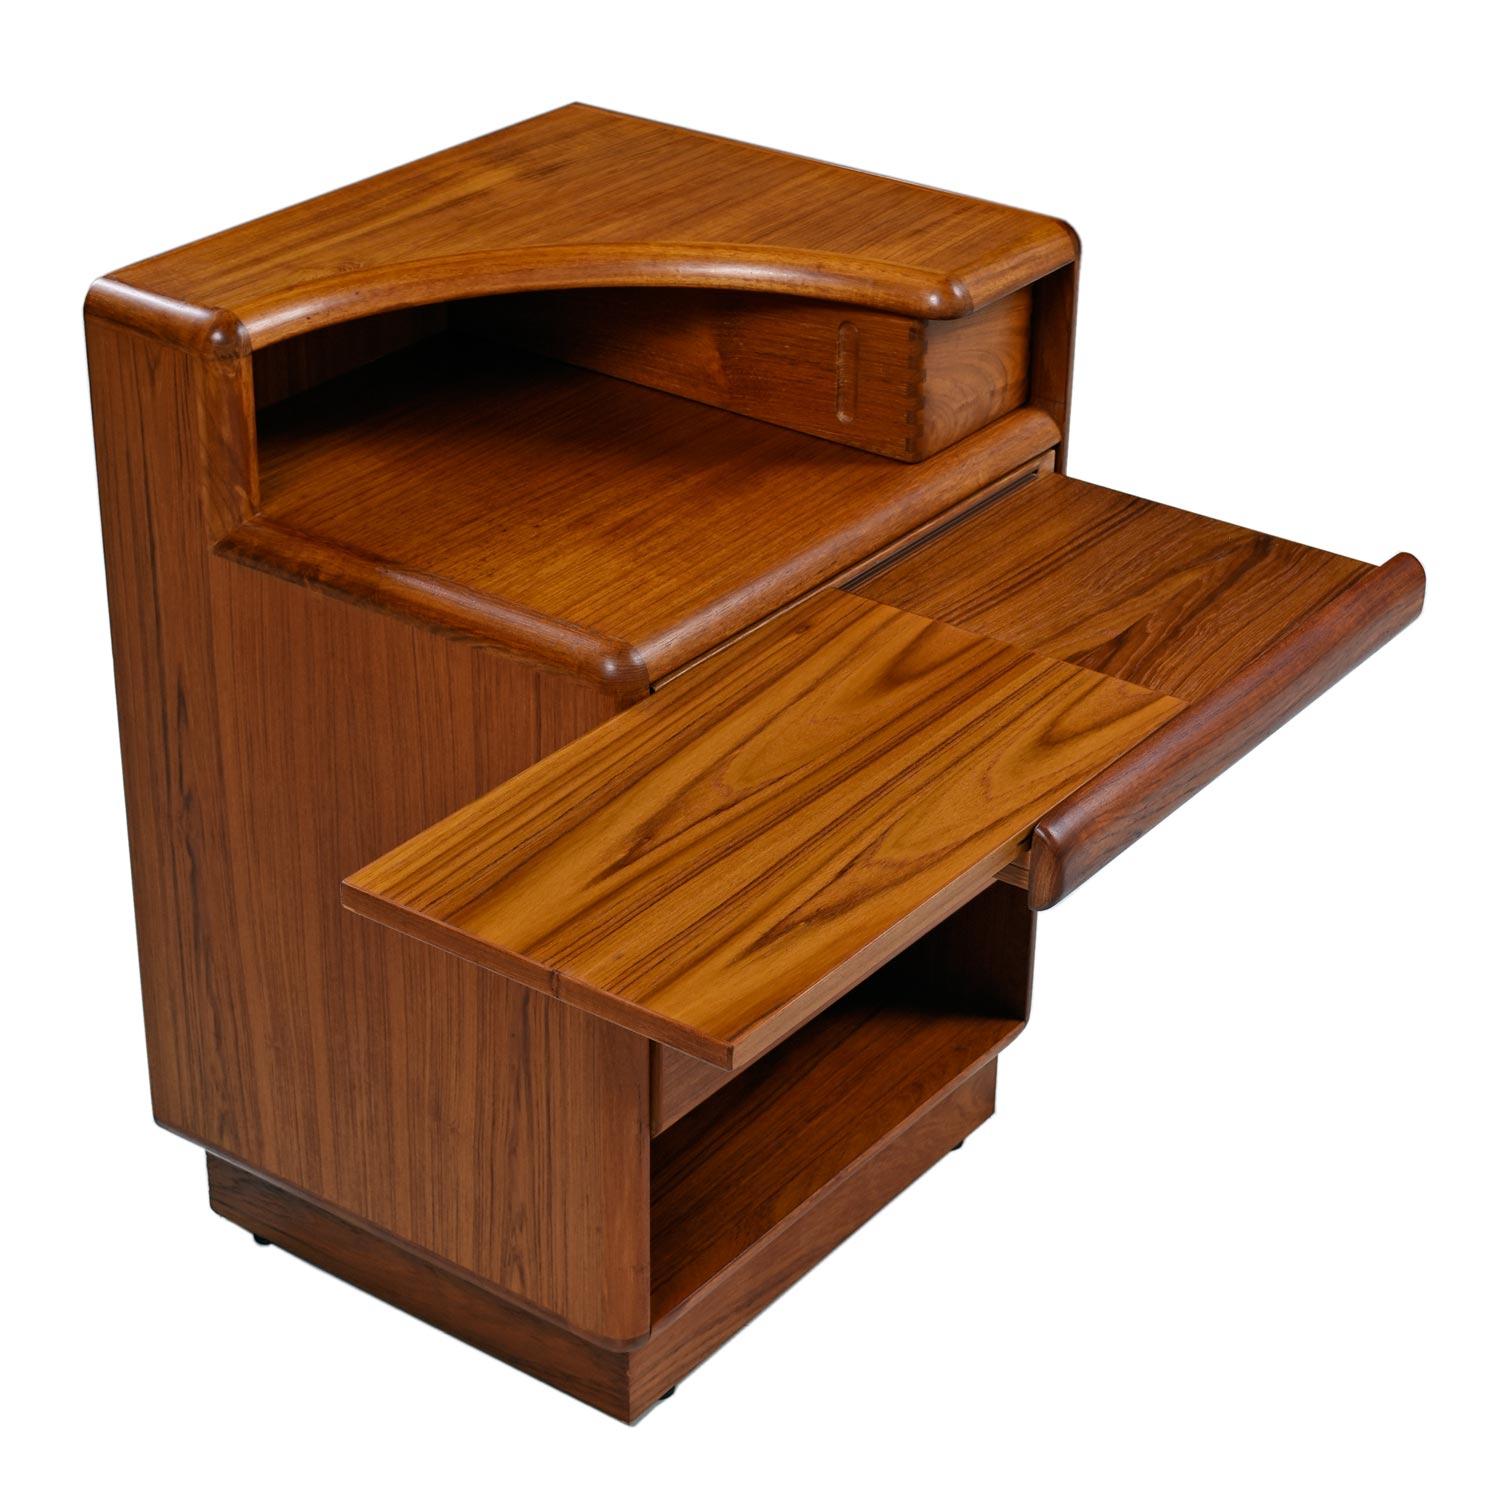 Sold as a pair

These may be the finest Mid-Century Modern Danish teak nightstands that we come to know. Made by Brouer, the nightstands hold many surprises. The mirrored nightstands (left and right side facing) were designed to perfectly flank a